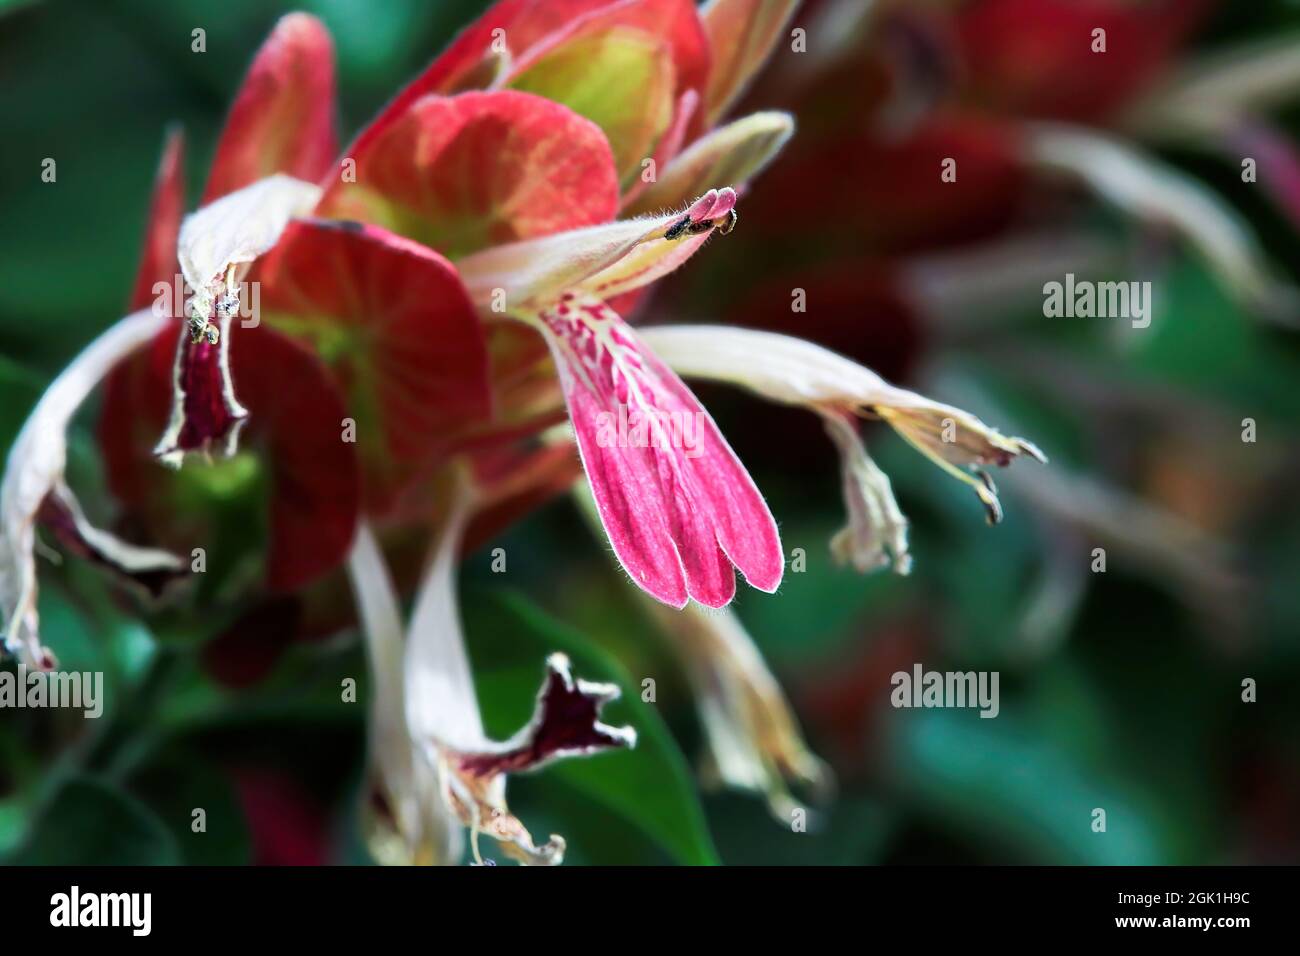 Wilted flowers extend from red leaves on the Shrimp Plant Stock Photo